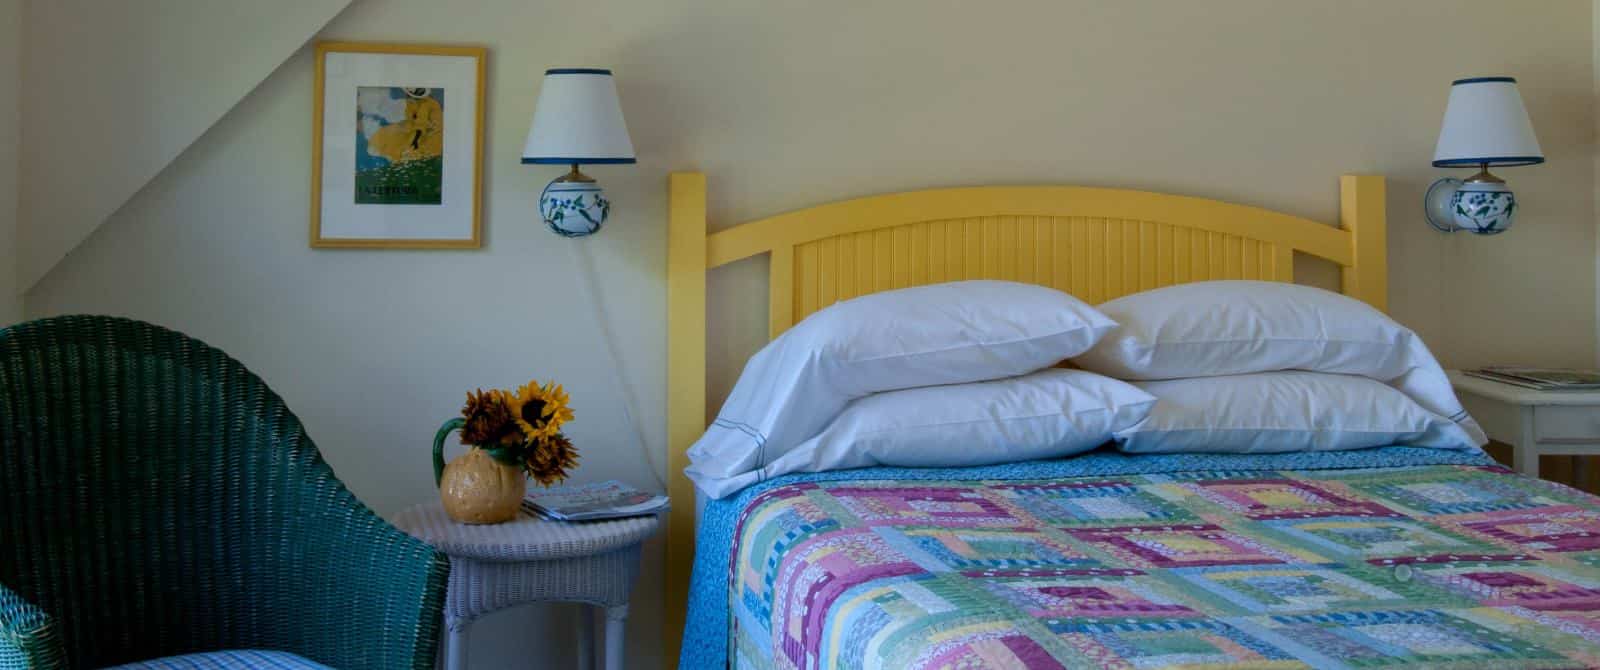 Pretty pastel quilt on a bed with a yellow wooden headboard in bedroom with a green wicker armchair and two china wall sconces.